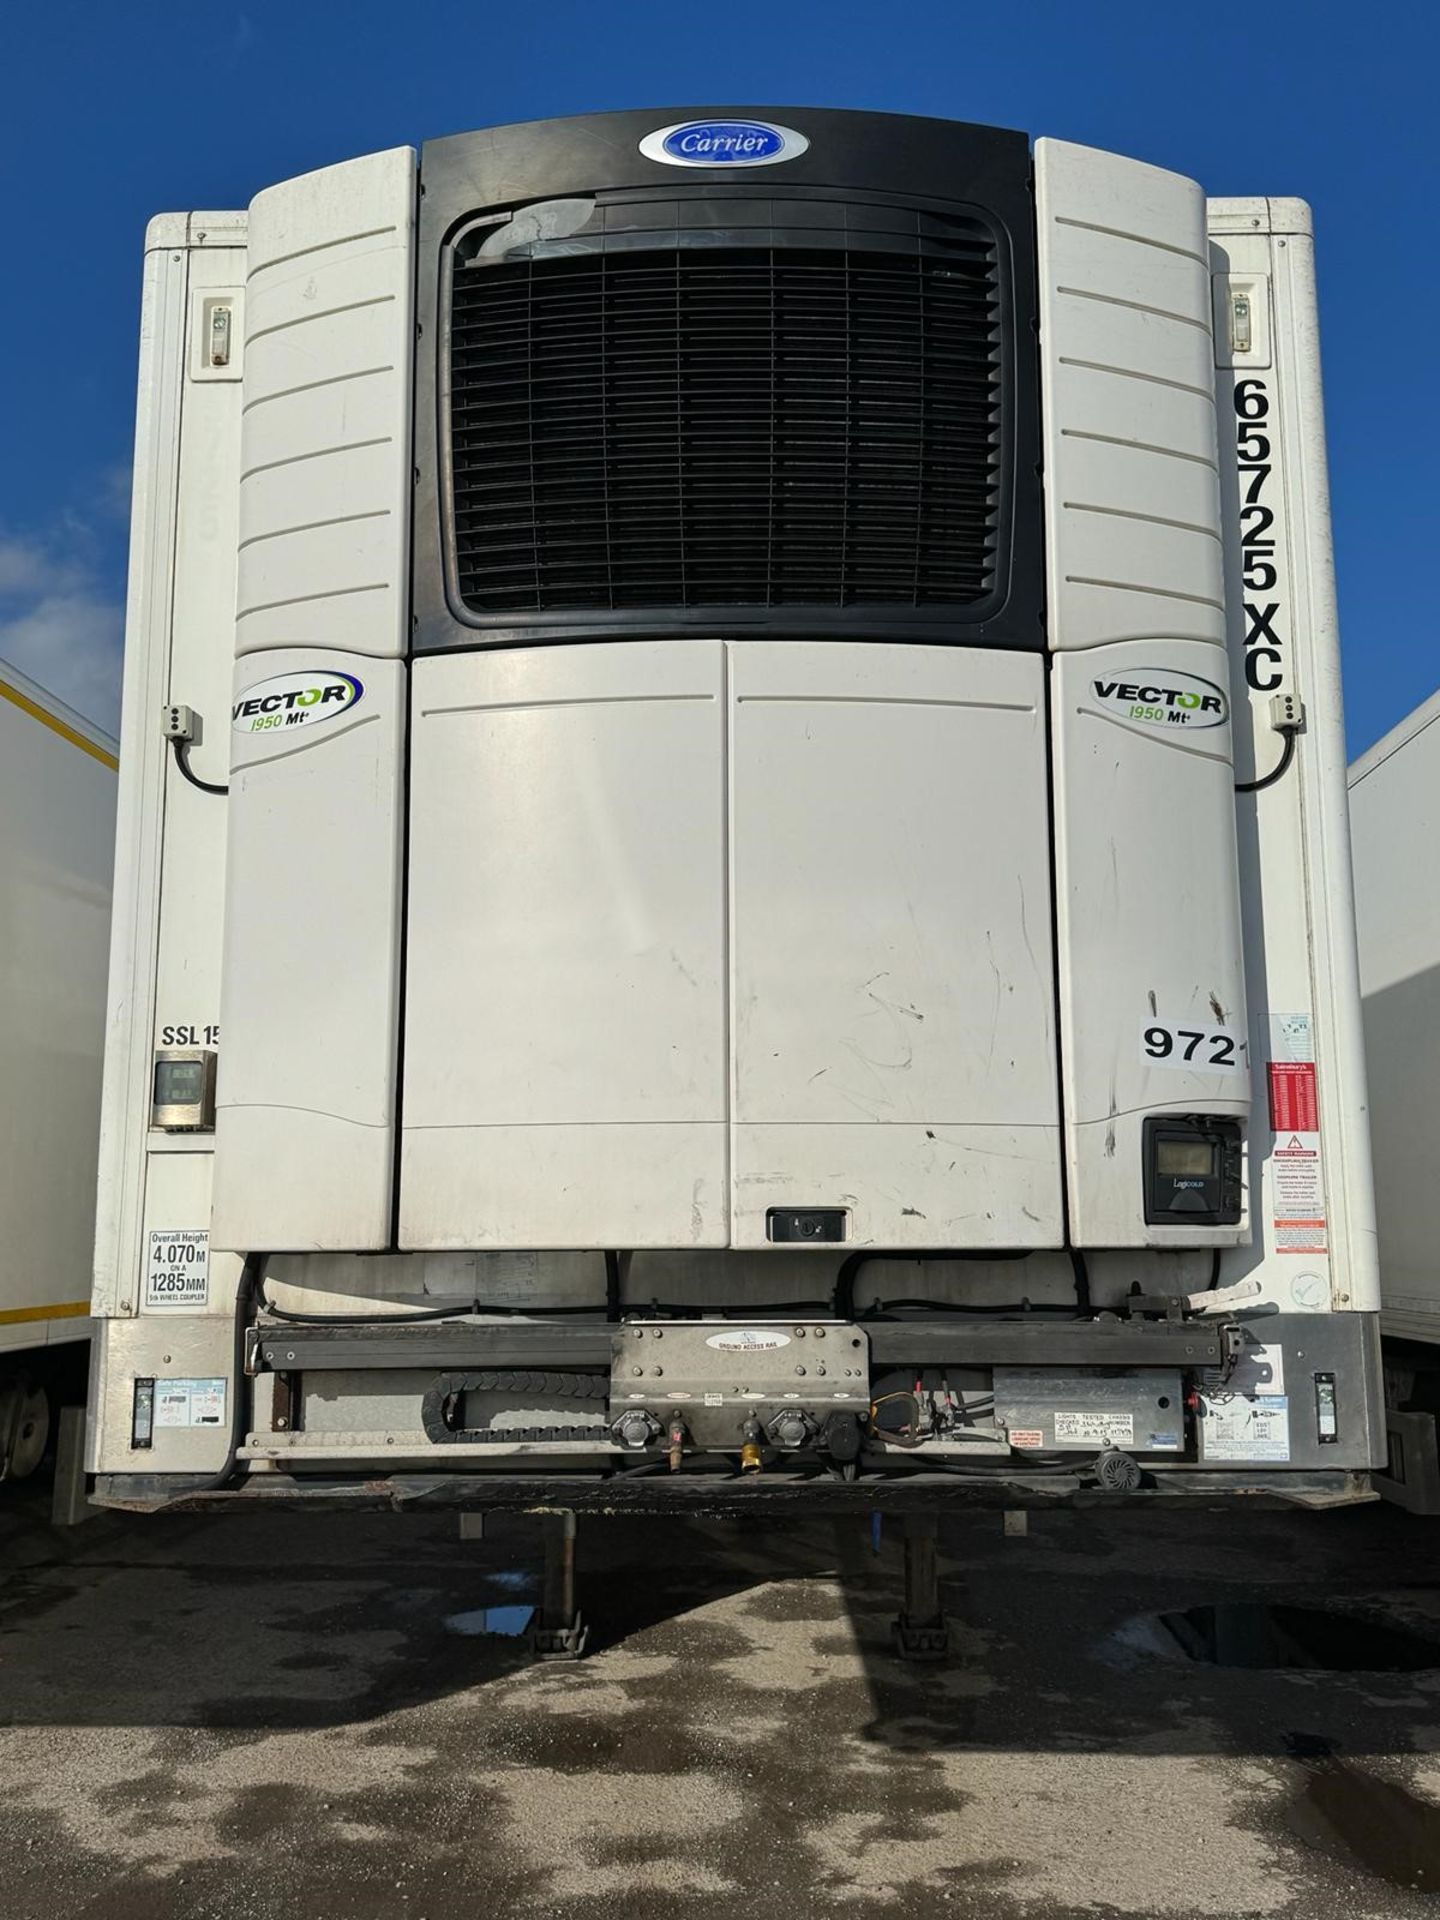 2015 Montracon 13.6 Refrigerated Multi-Temp Trailer - Image 2 of 13